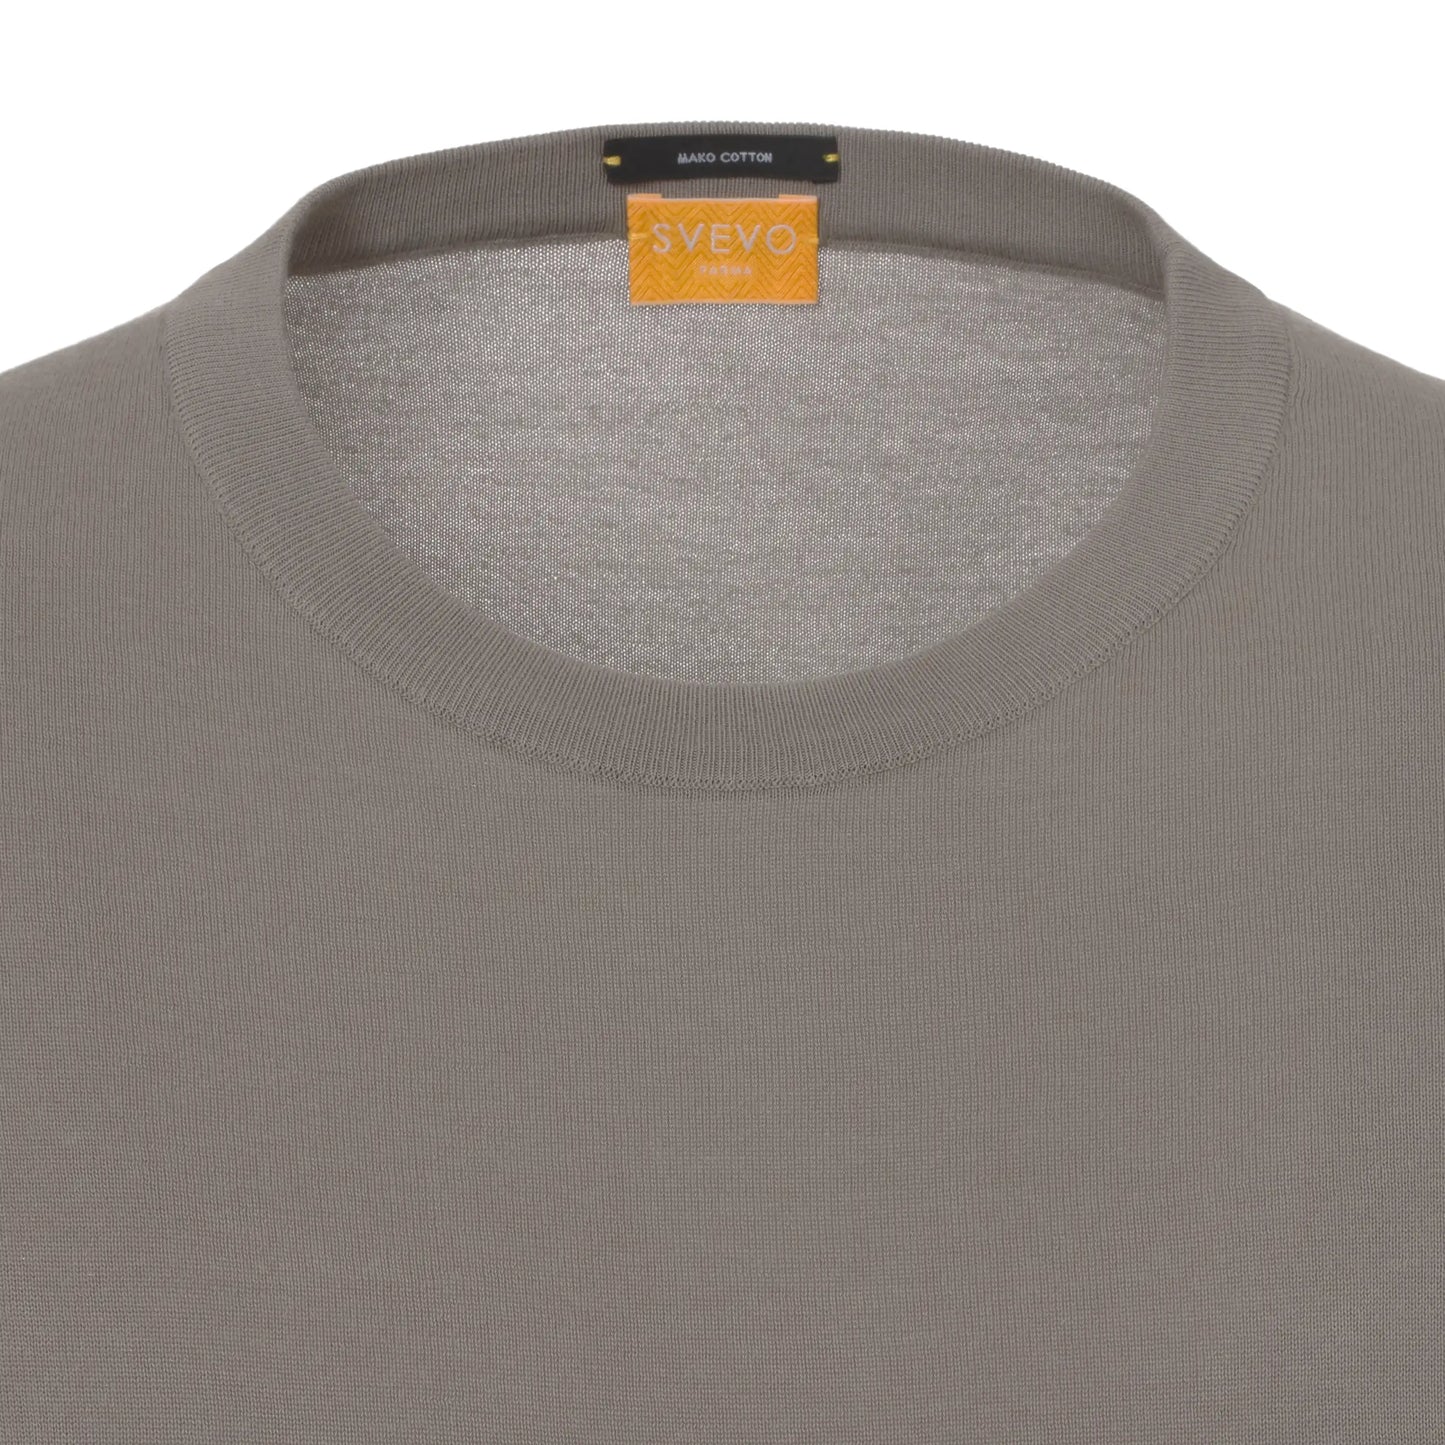 Crew-Neck Cotton Jersey T-Shirt in Taupe